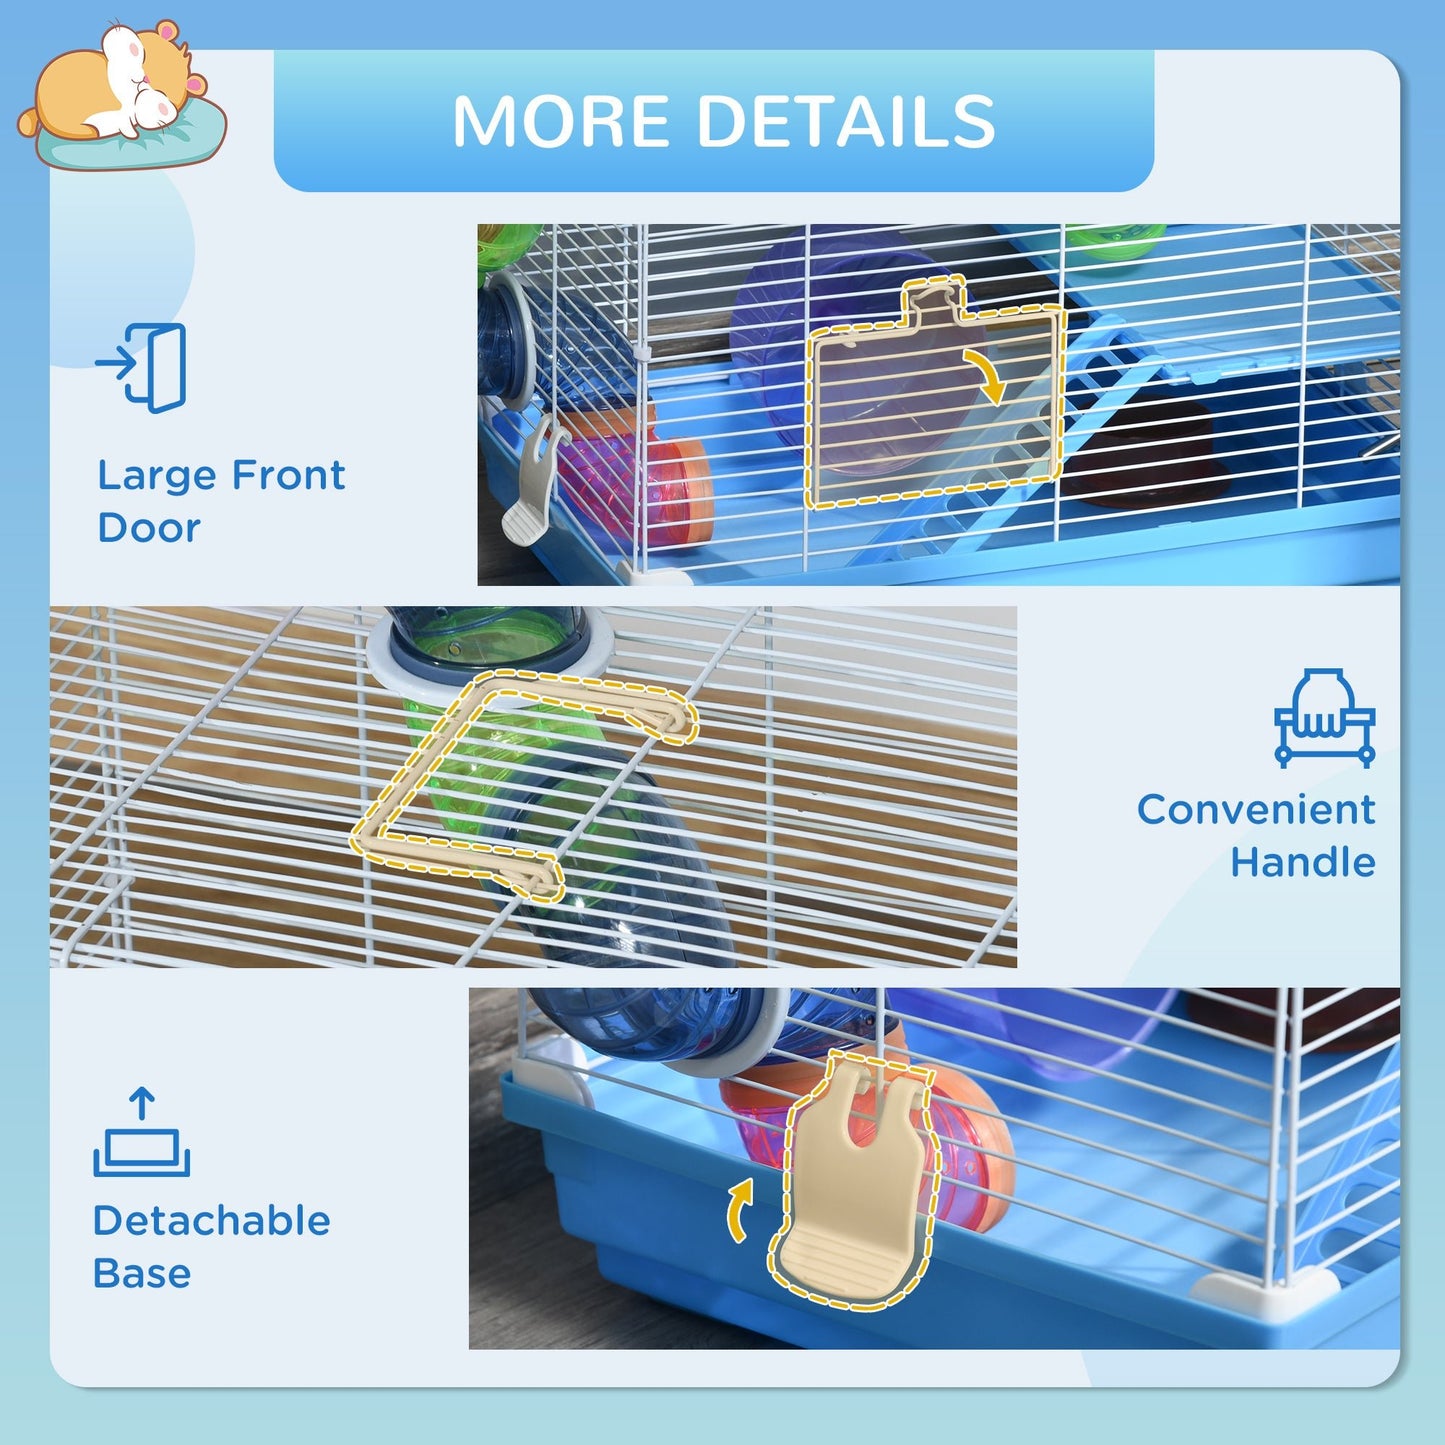 AOSOM-2-Level Hamster Cage House Rodent Gerbil Home Mouse Rat Habitat Metal Wire with Exercise Wheel, Play Tubes, Water Bottle, Food Dishes & Ladder - Outdoor Style Company